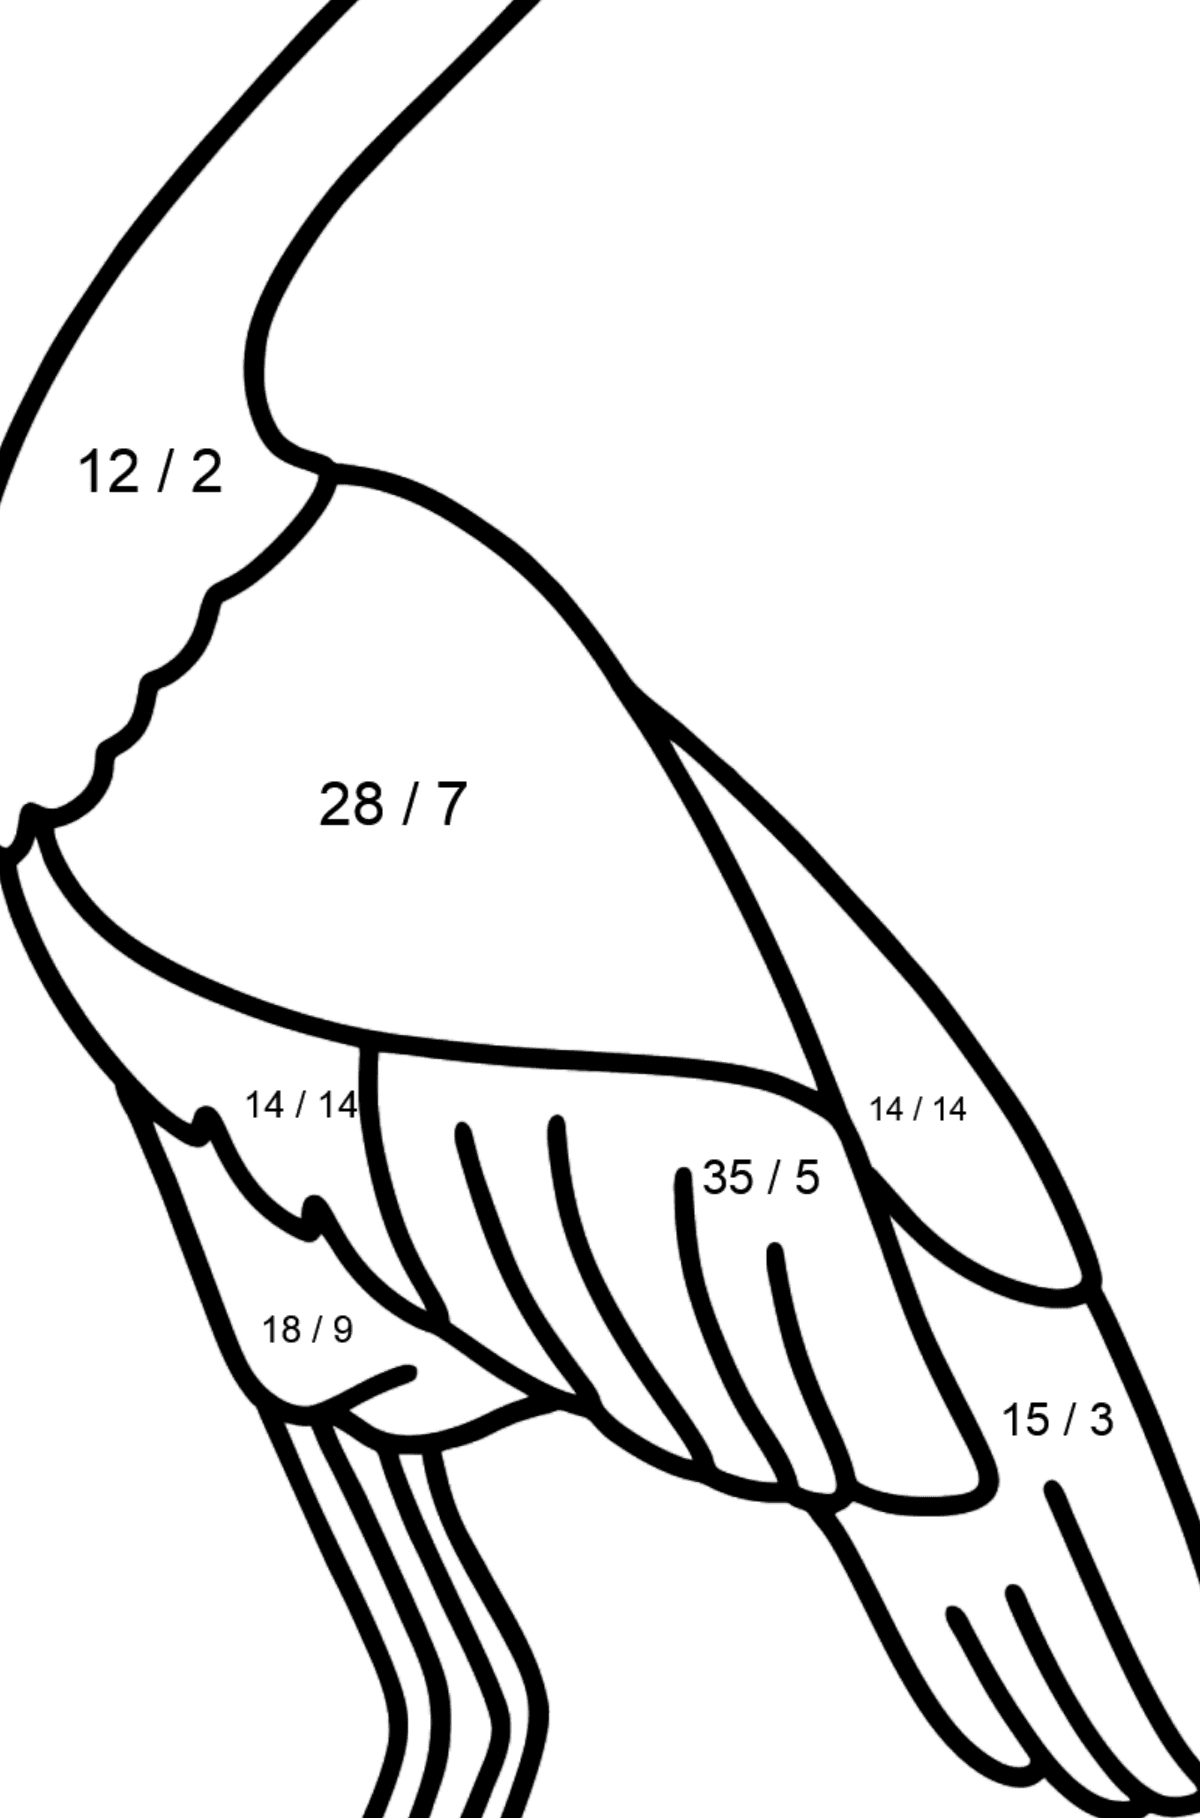 Stork coloring page - Math Coloring - Division for Kids